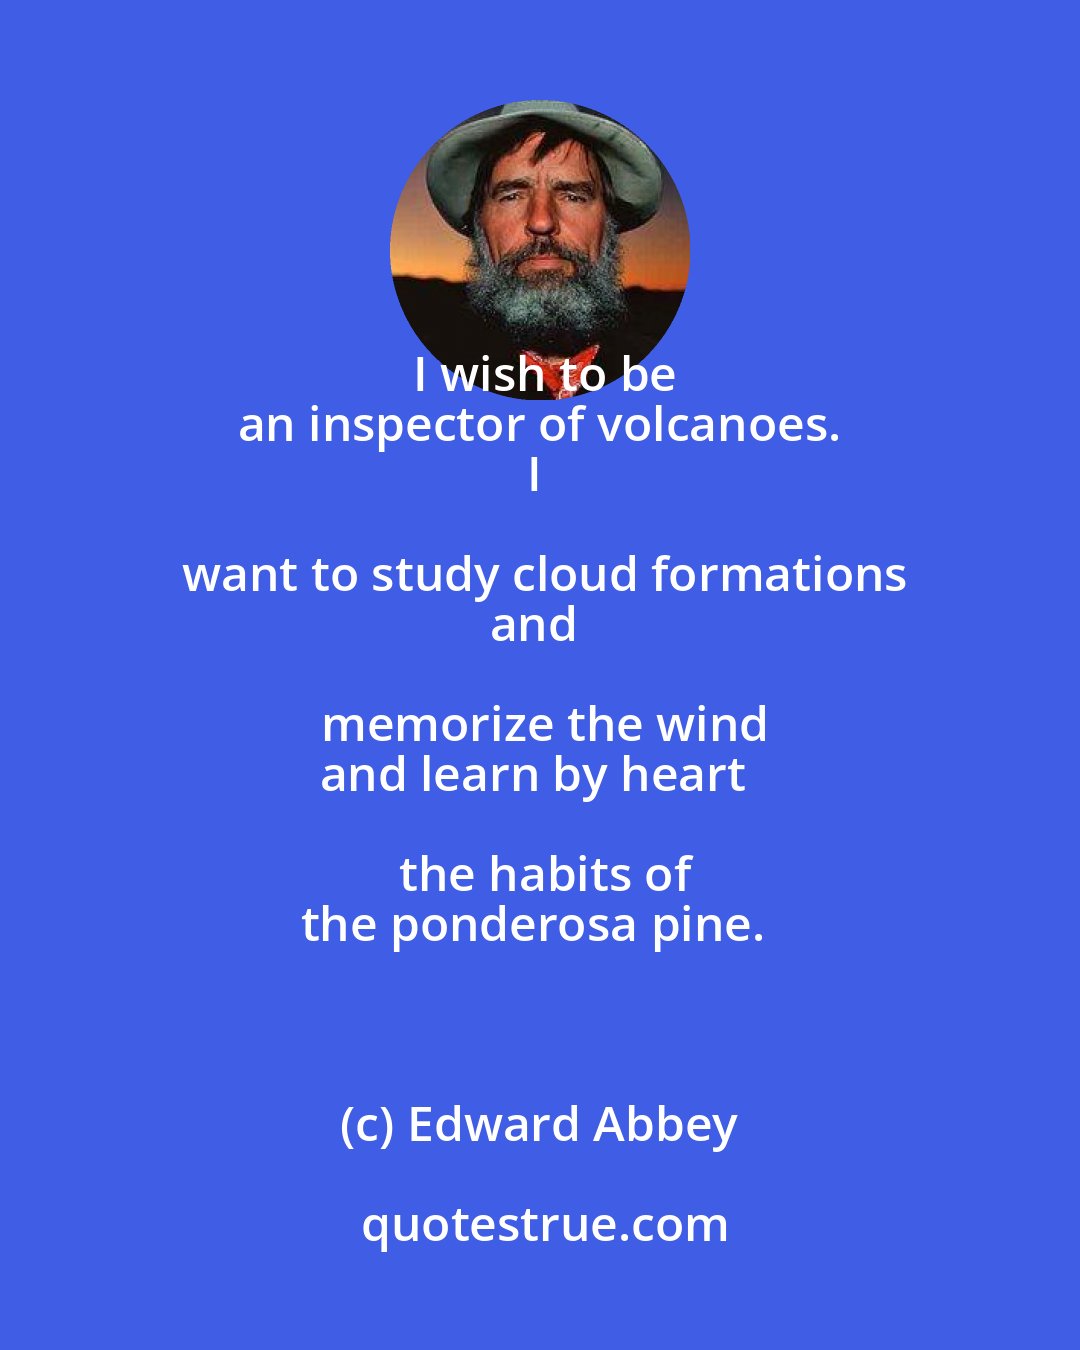 Edward Abbey: I wish to be
an inspector of volcanoes.
I want to study cloud formations
and memorize the wind
and learn by heart the habits of
the ponderosa pine.